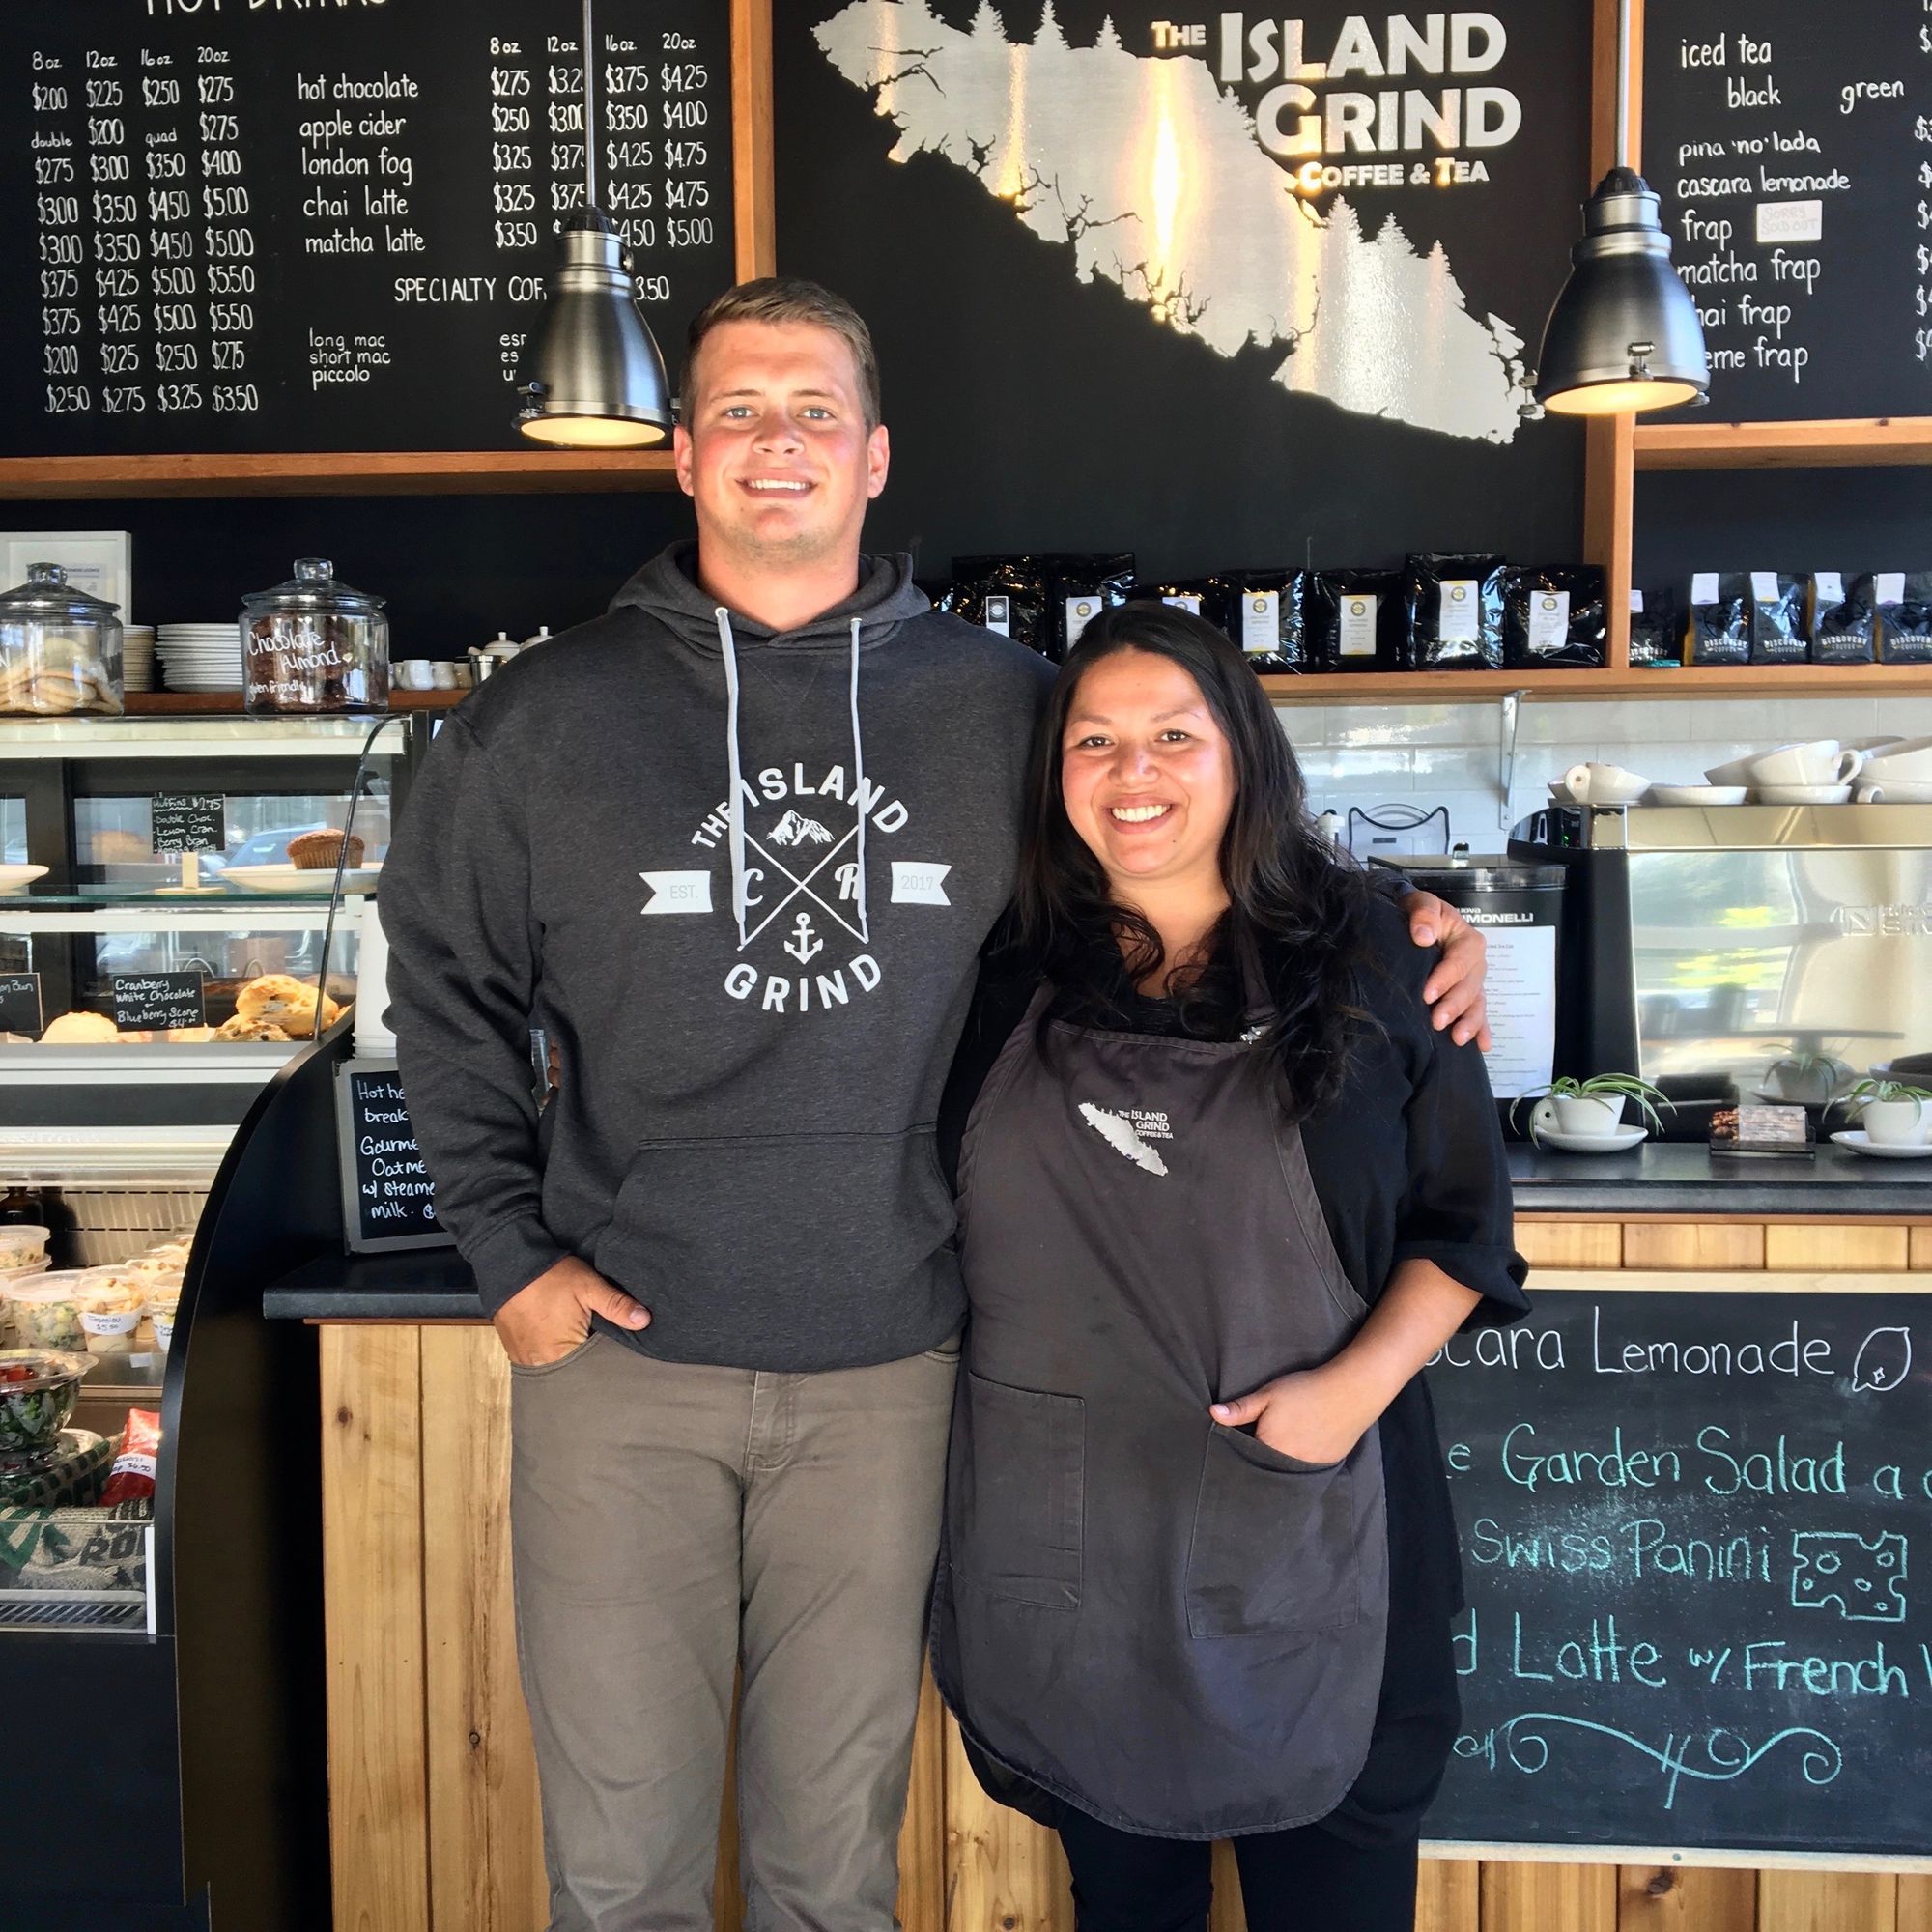 Celebrating community over coffee, tea, and food - The Island Grind